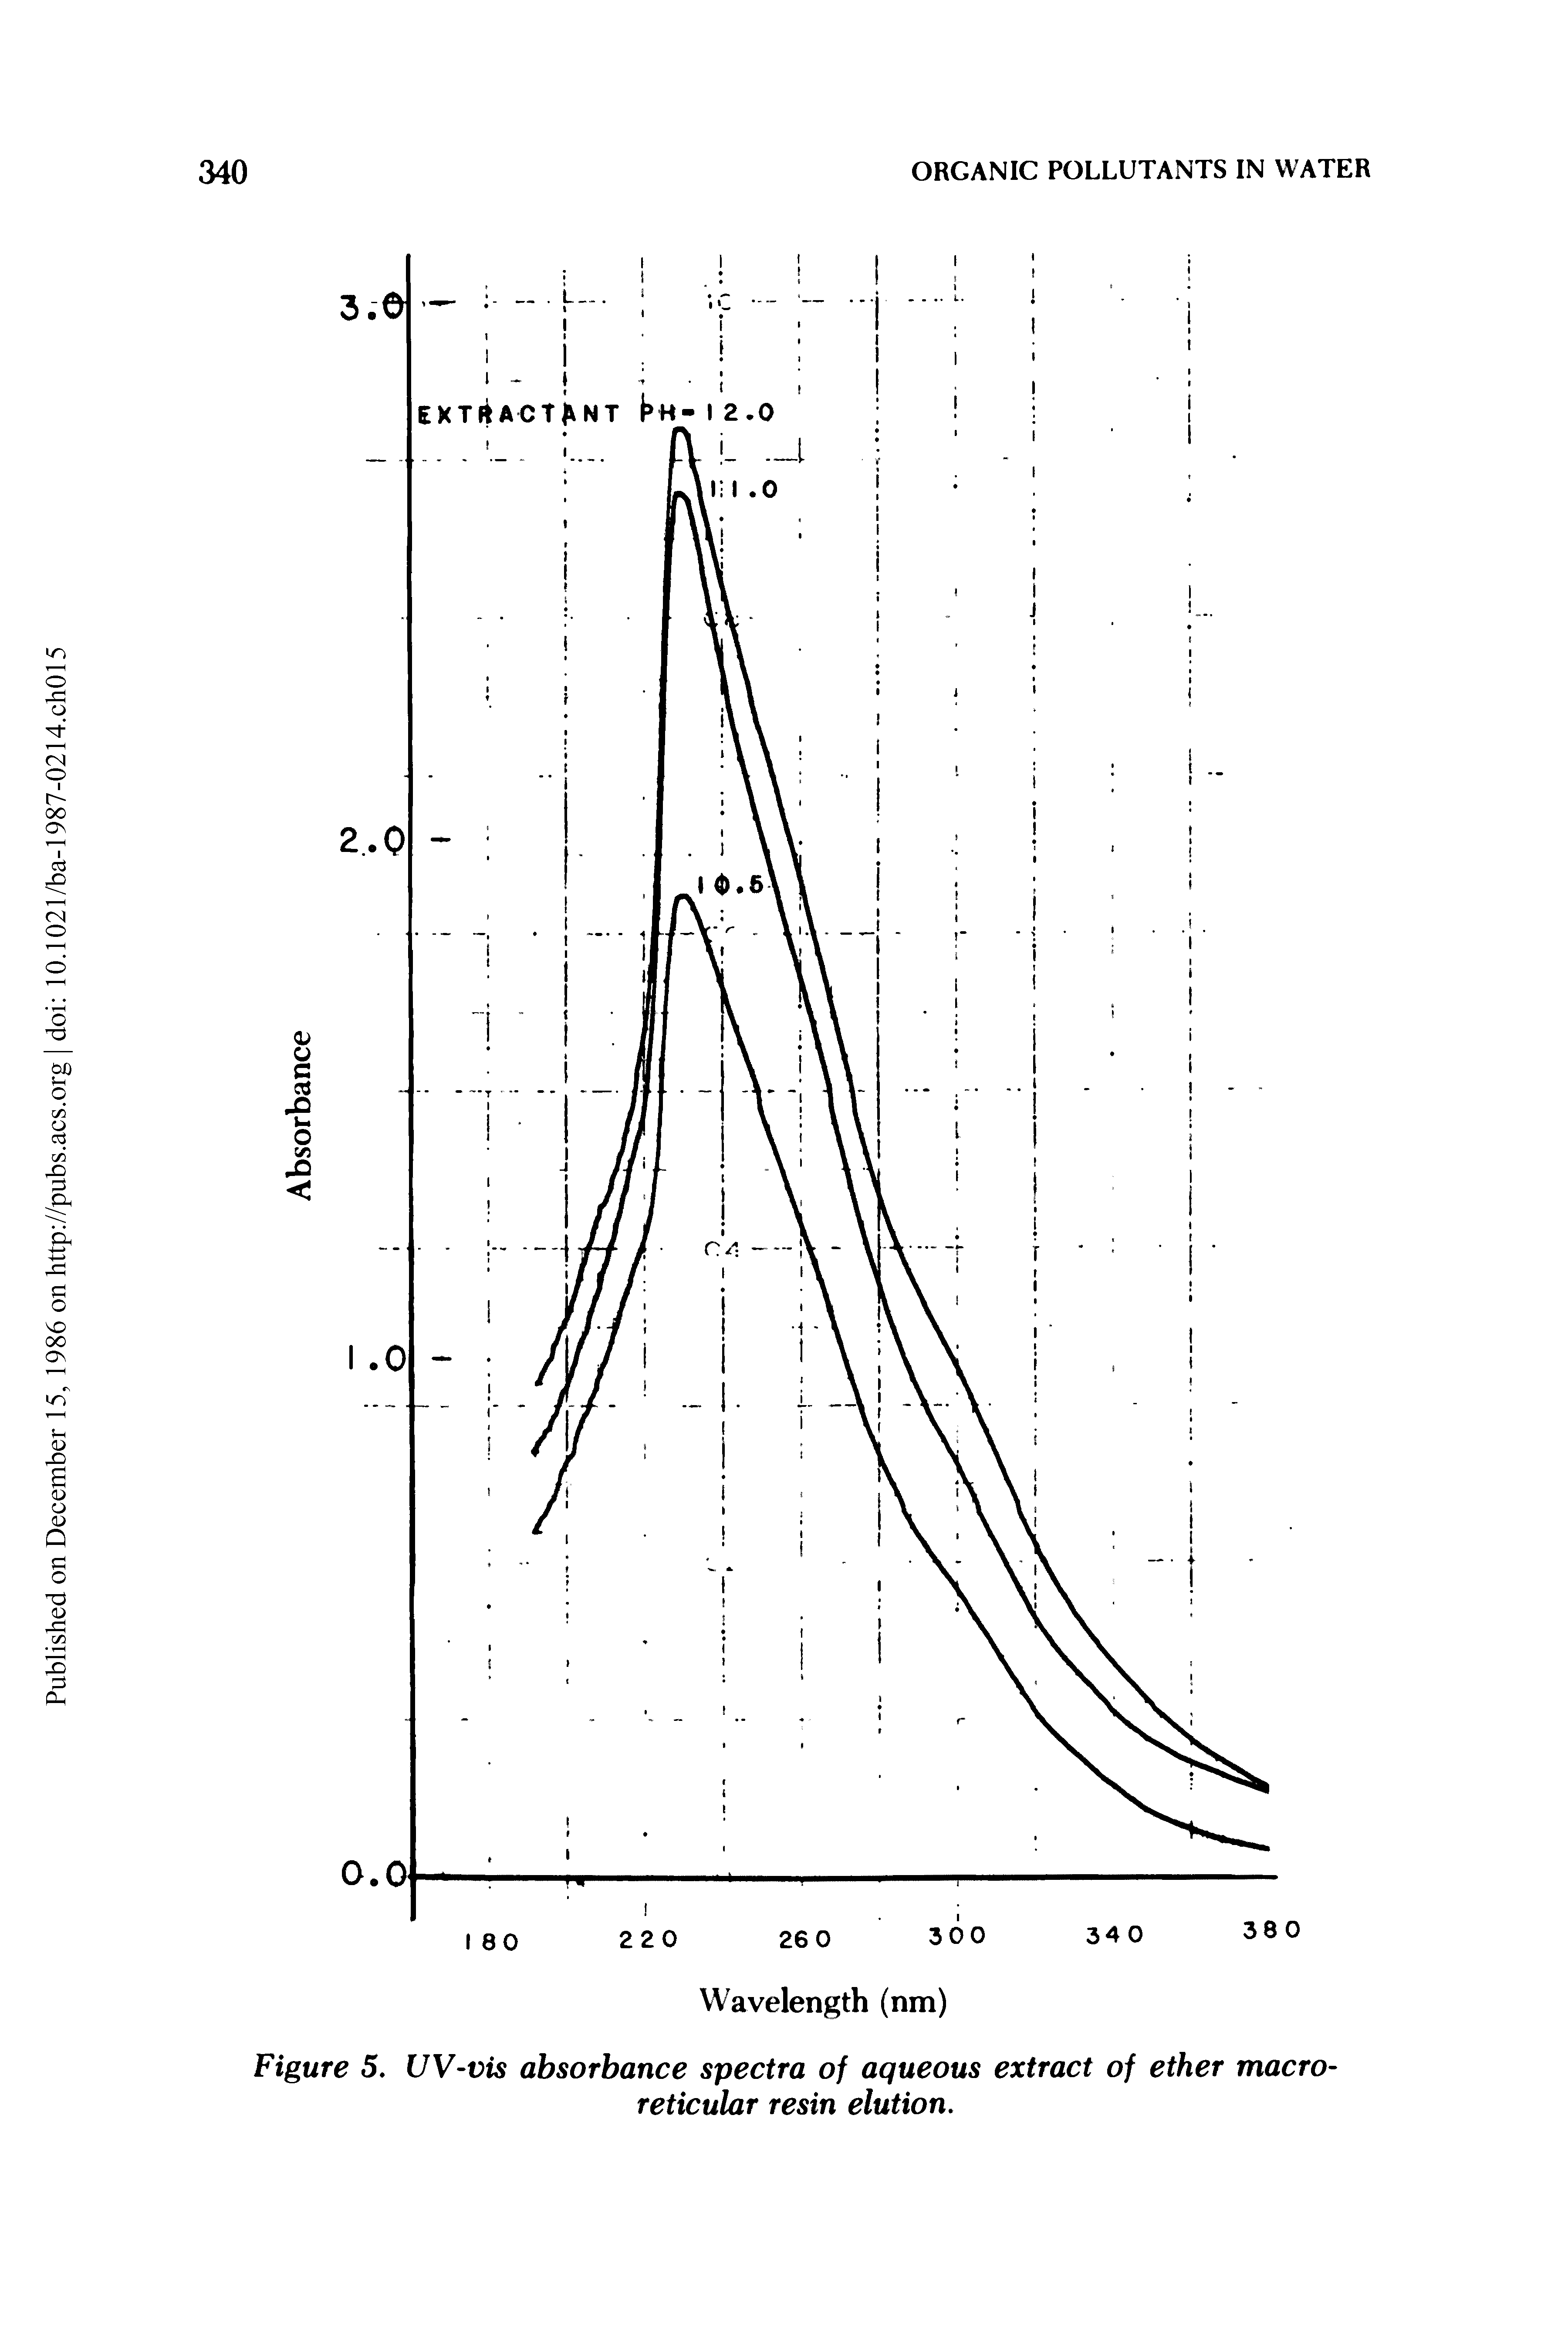 Figure 5. UV-vis absorbance spectra of aqueous extract of ether macro-reticular resin elution.